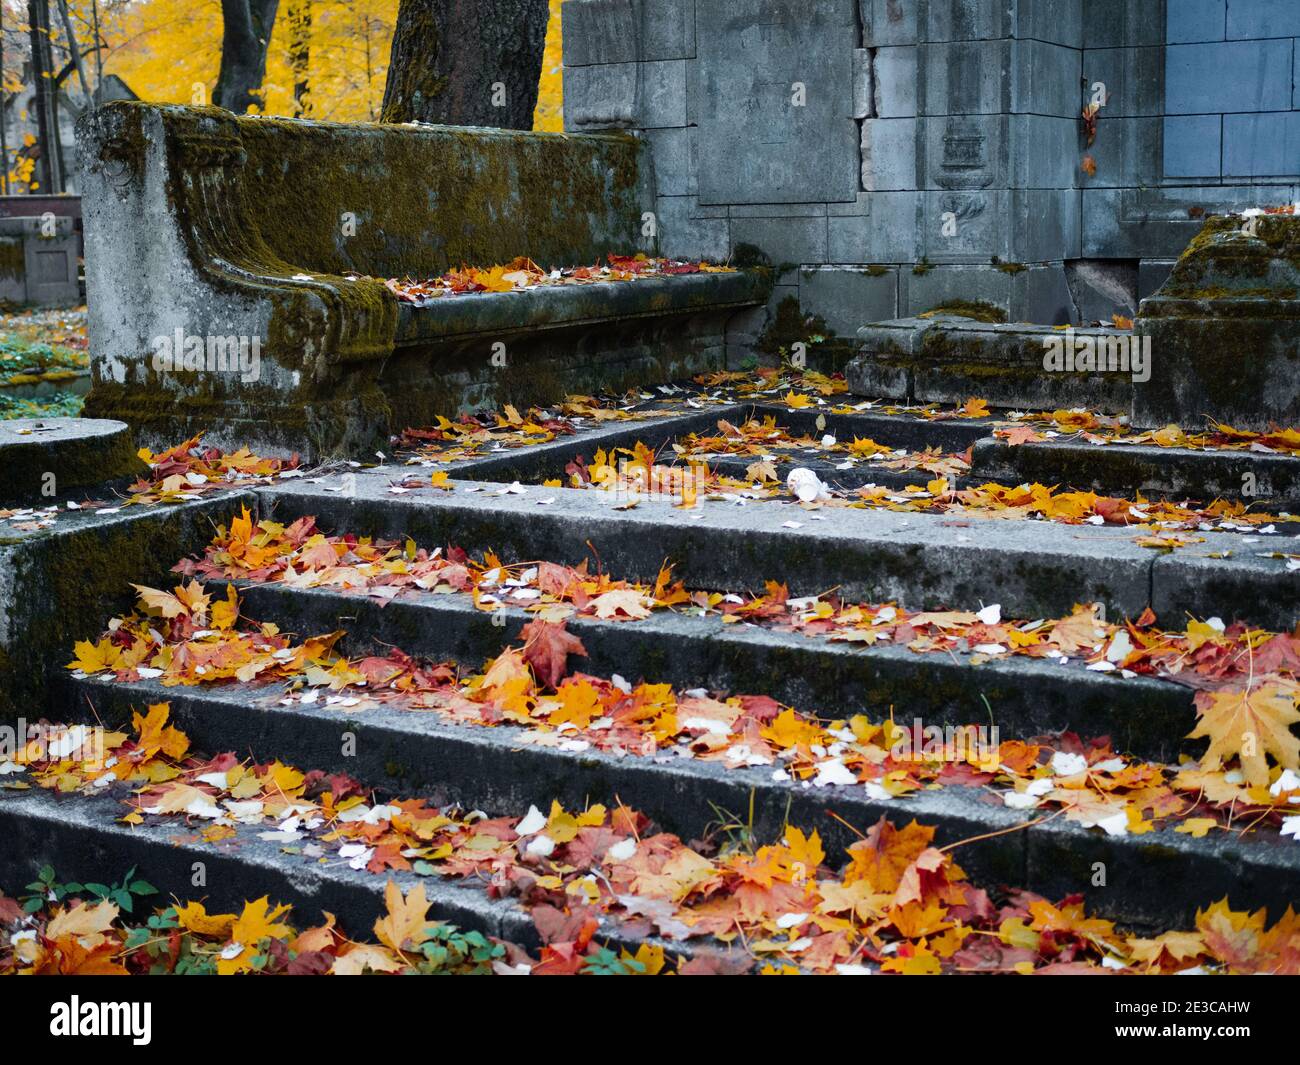 The old Catholic cemetery in the fall. Abandoned graves under a layer of fallen leaves. Stone steps and a bench in front of the entrance to the crypt. Stock Photo